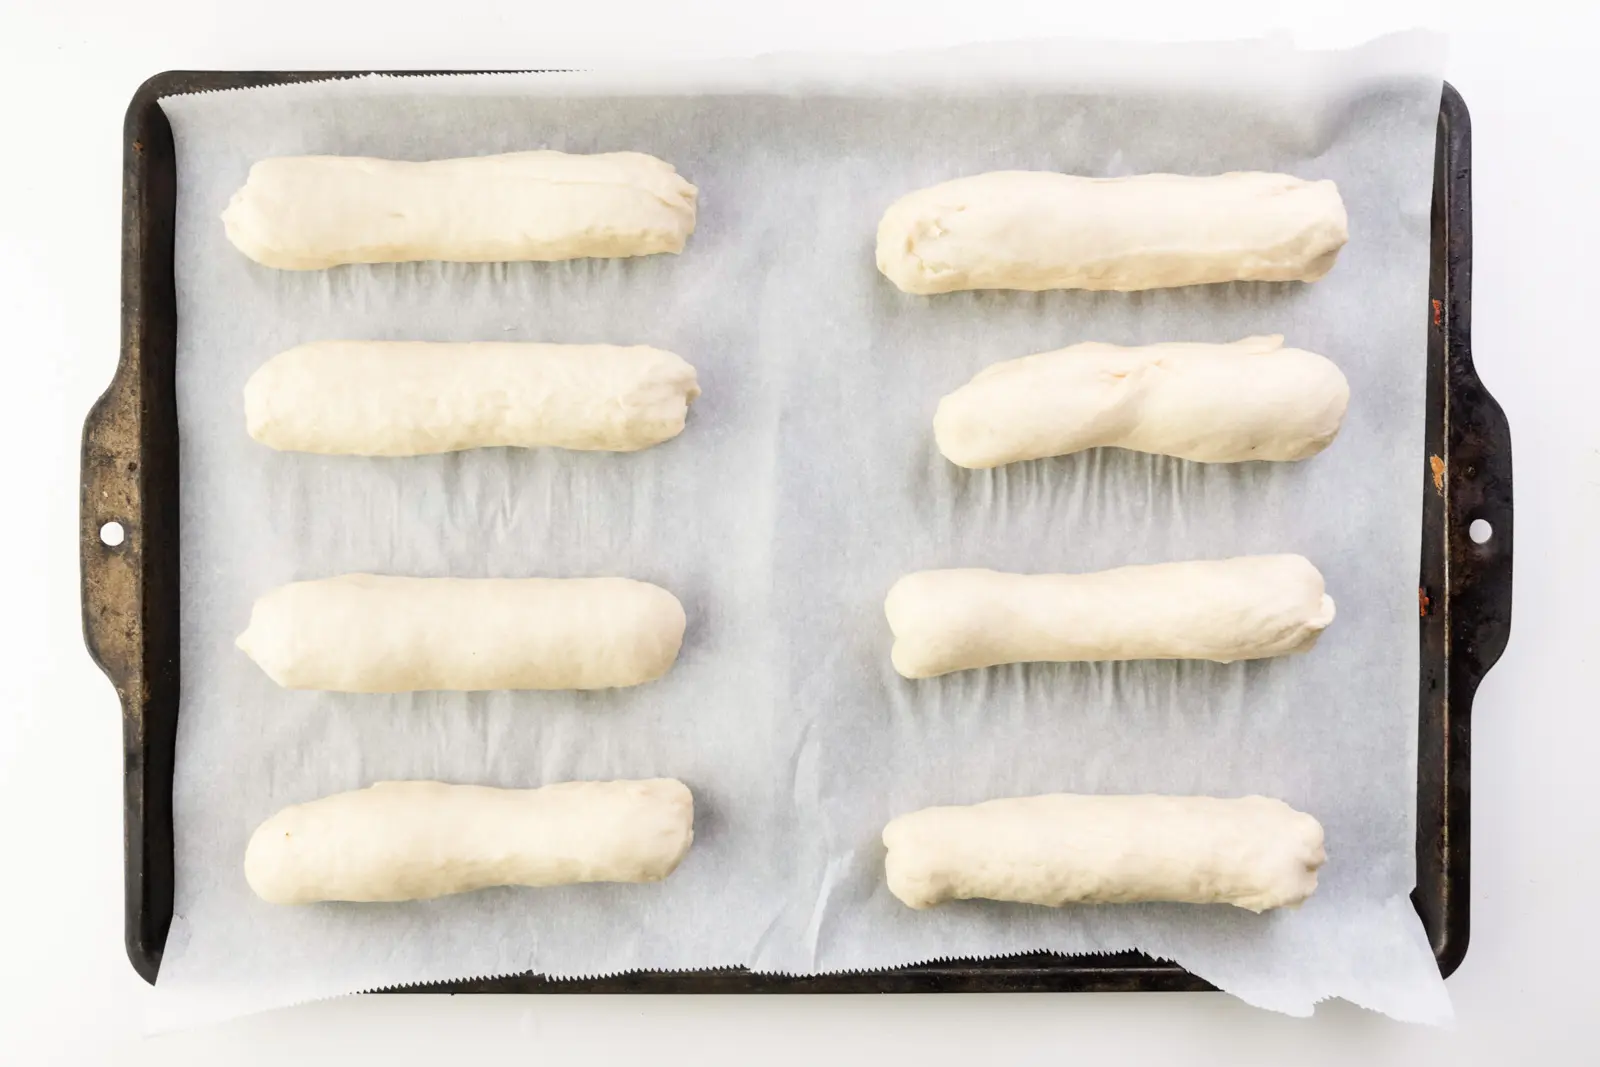 Two rows of unbaked hot dog buns sit on a pan lined with parchment paper.